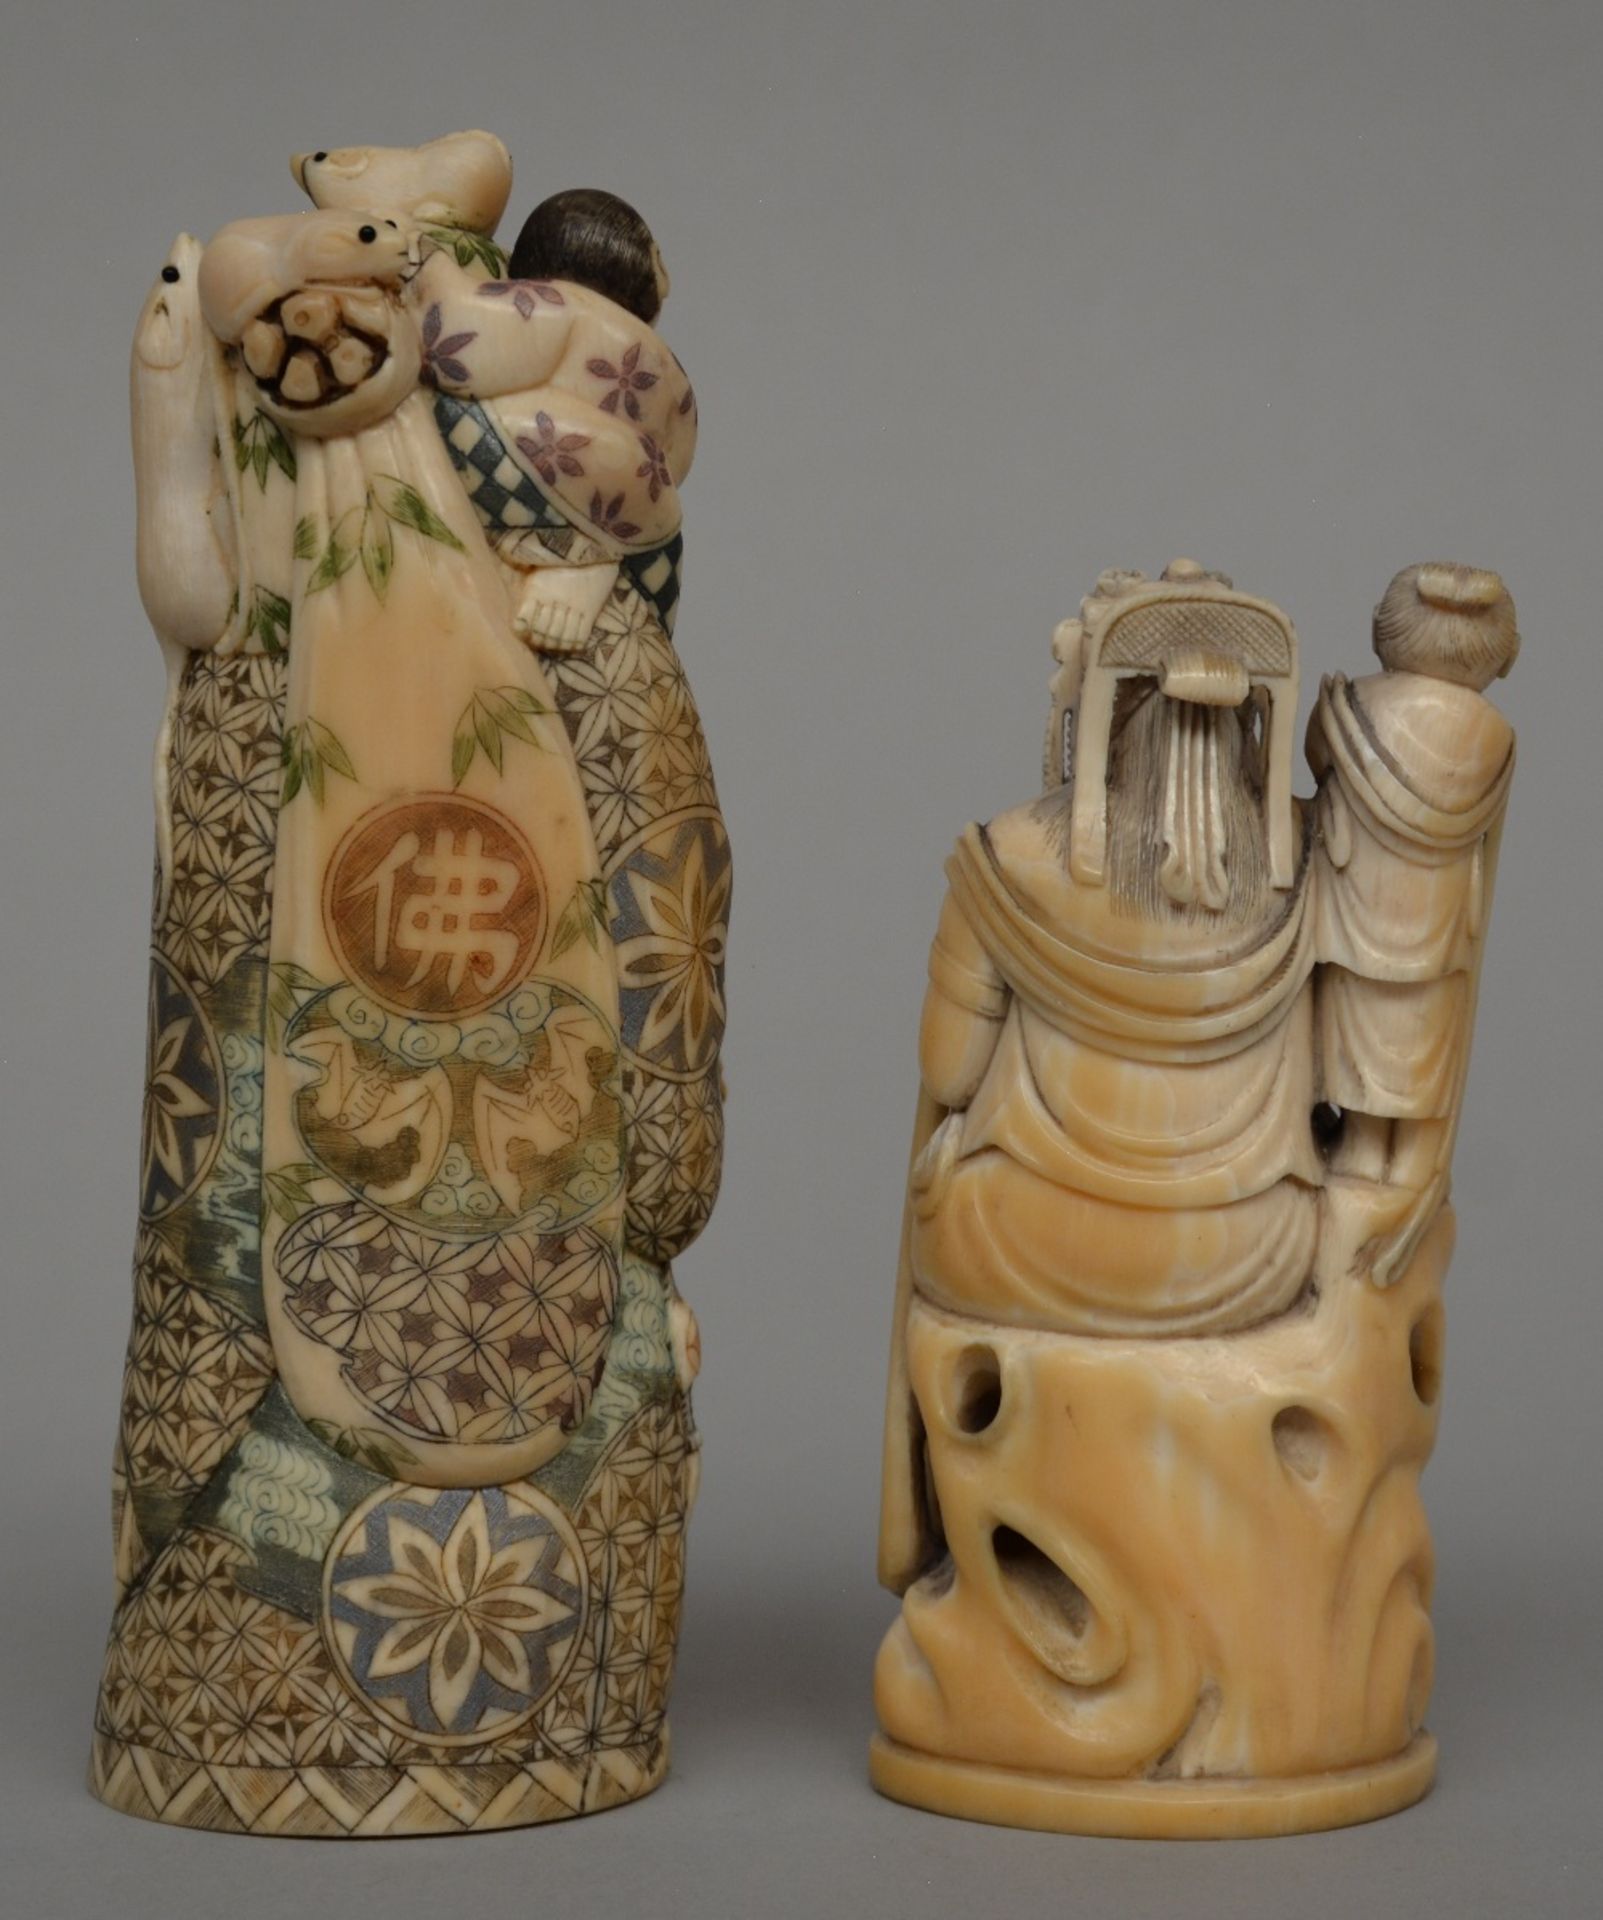 A Japanese ivory sculpture of a mythological figure, scrimshaw decorated, late Meiji period, H 16, - Image 3 of 6